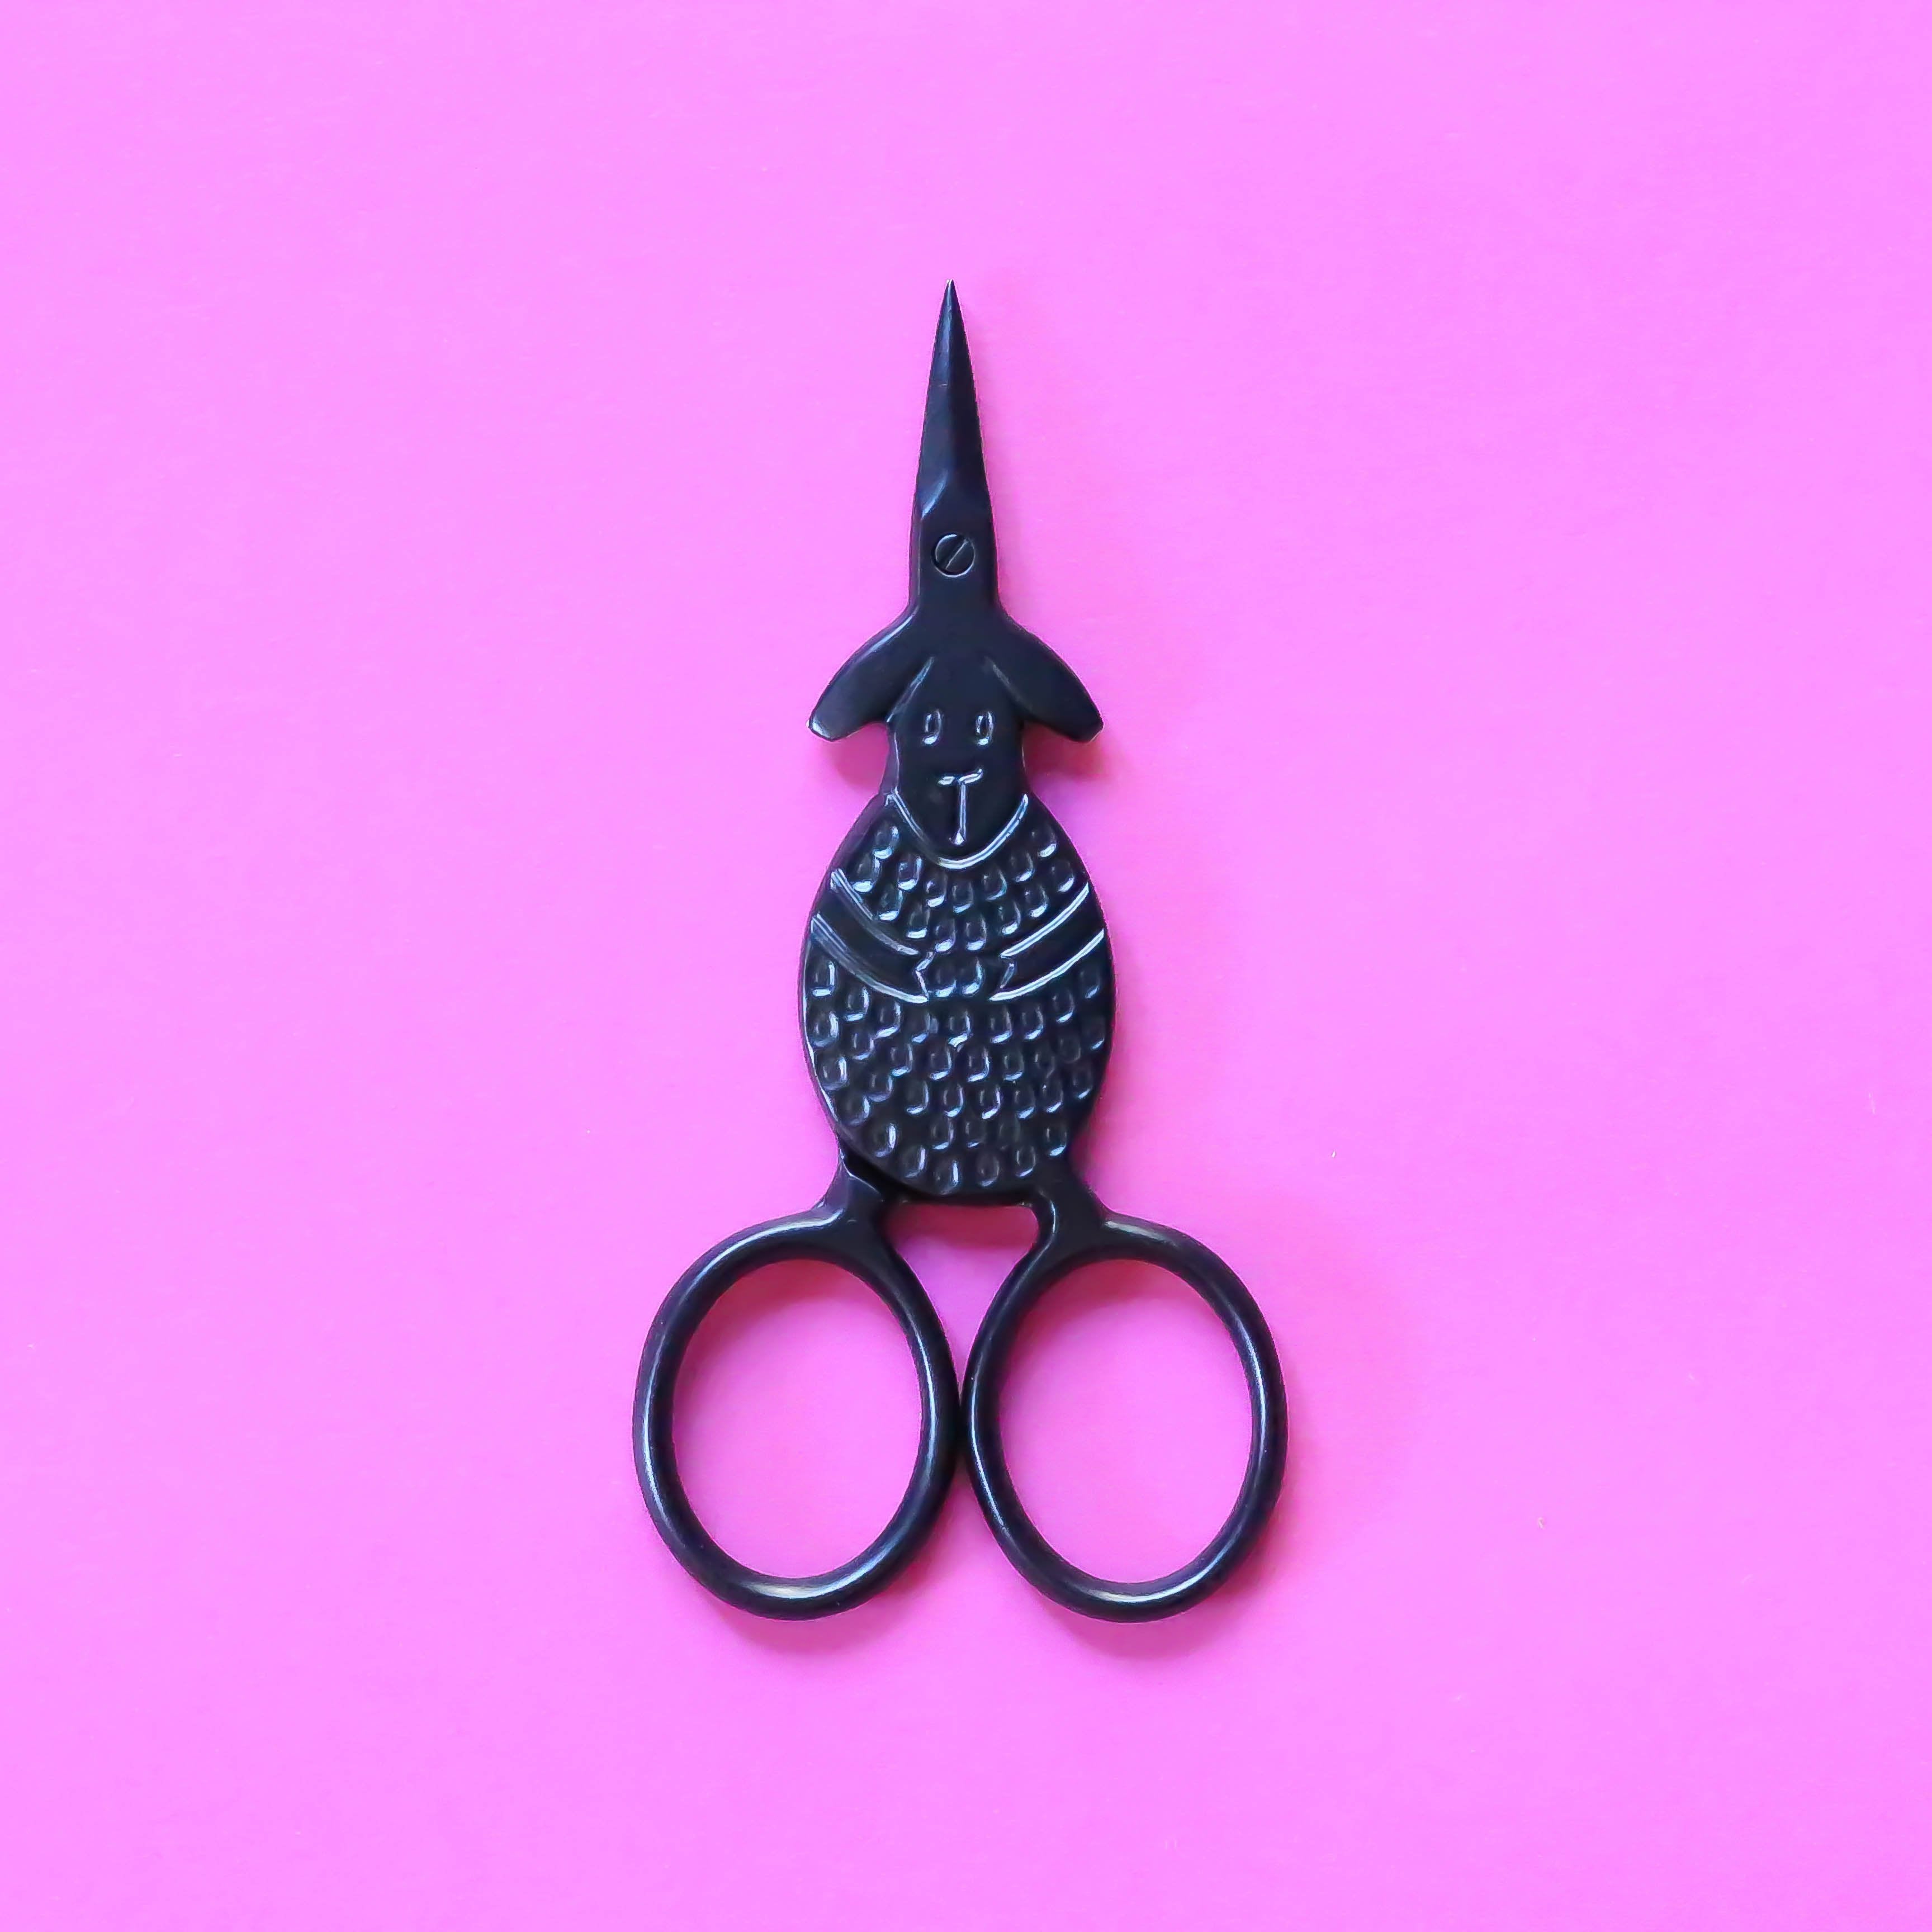 Black Sheep Embroidery Scissors closed on pink background